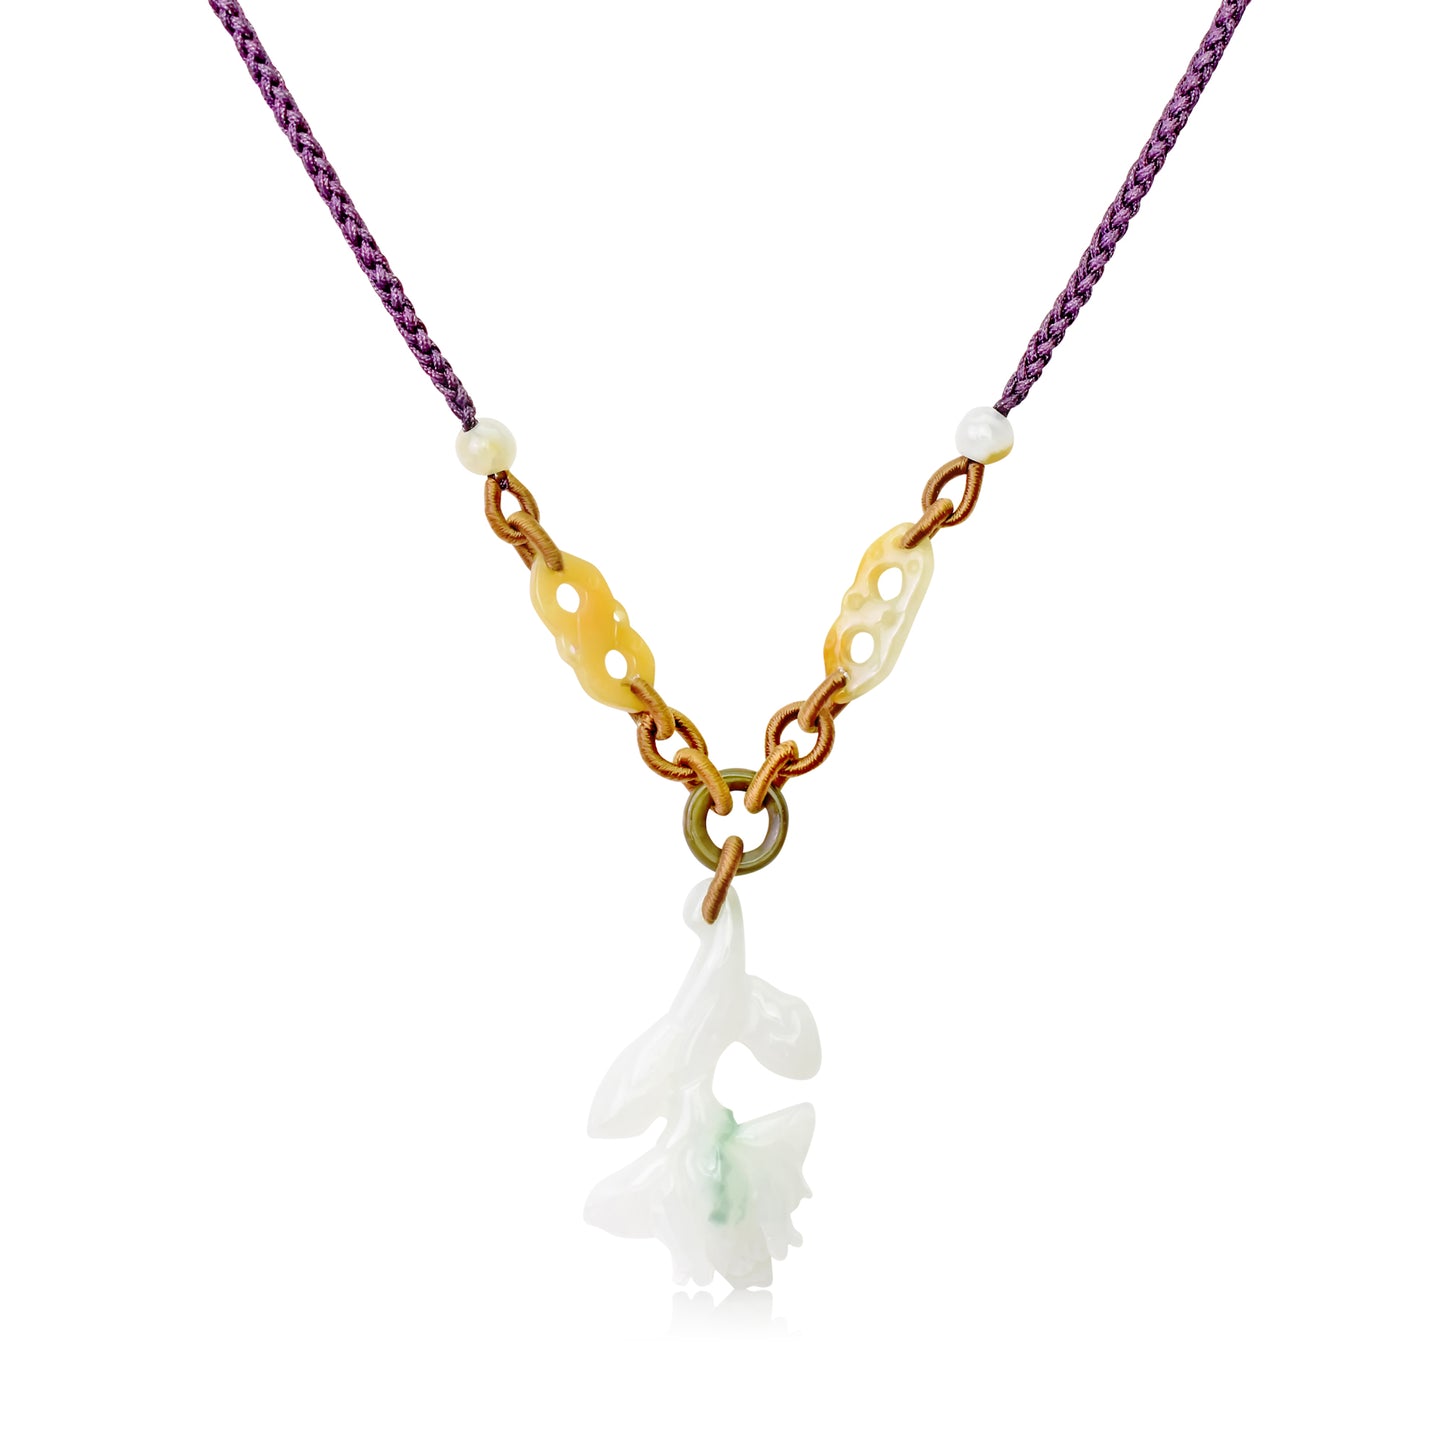 Show Your Strength and Resilience with a Protea Flower Necklace made with Lavender Cord